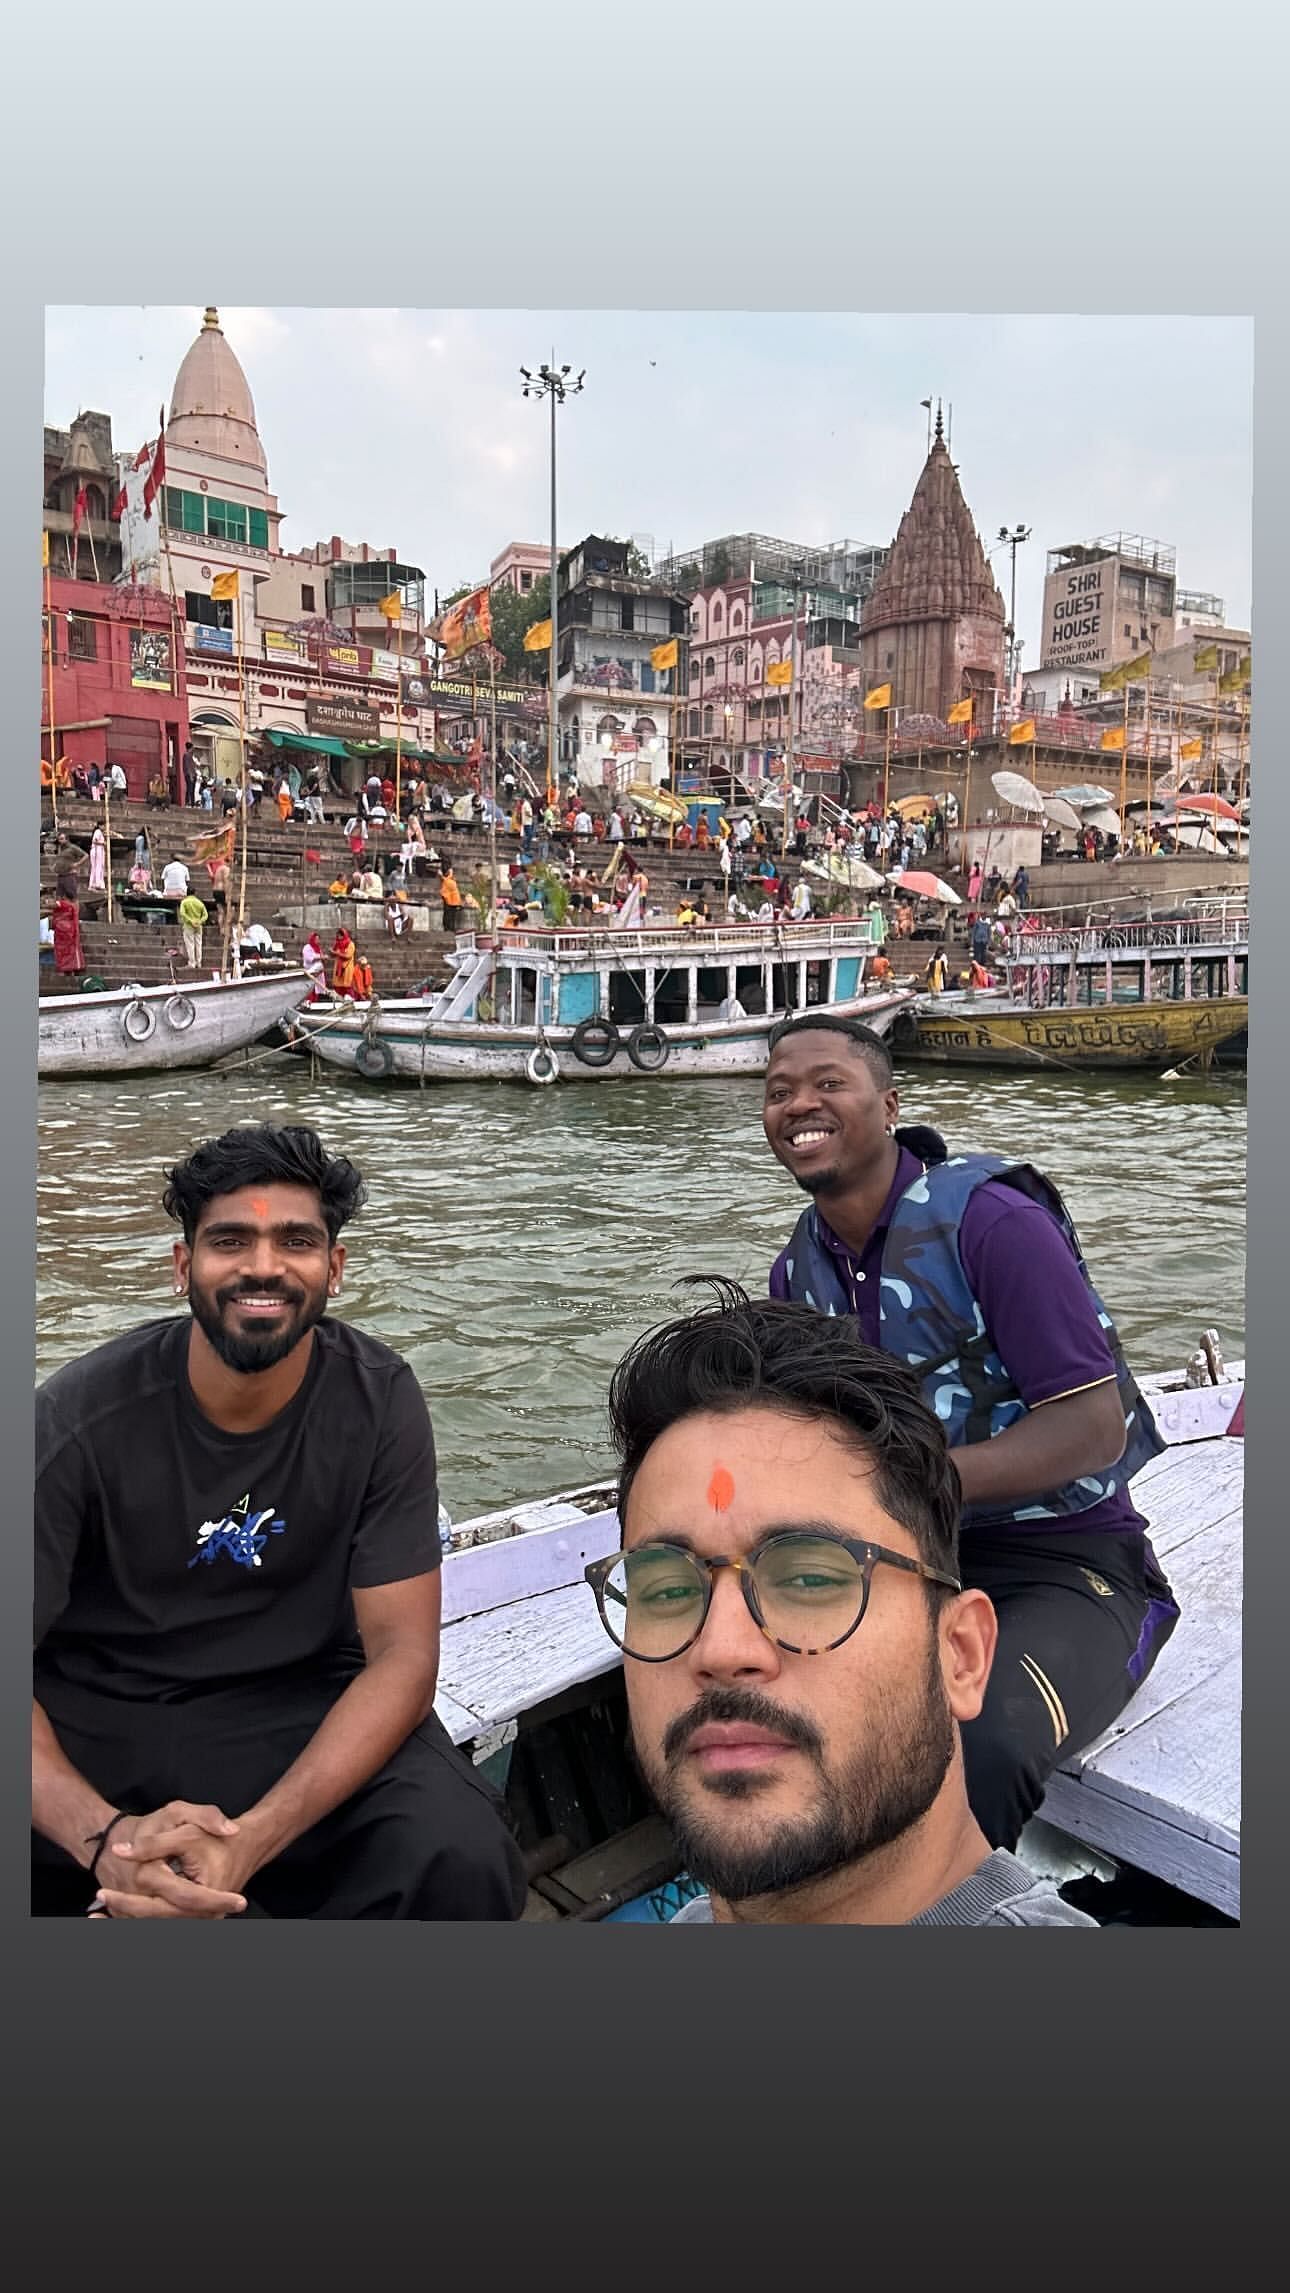 KKR cricketers, including Manish Pandey and KS Bharat, taking a boat ride.